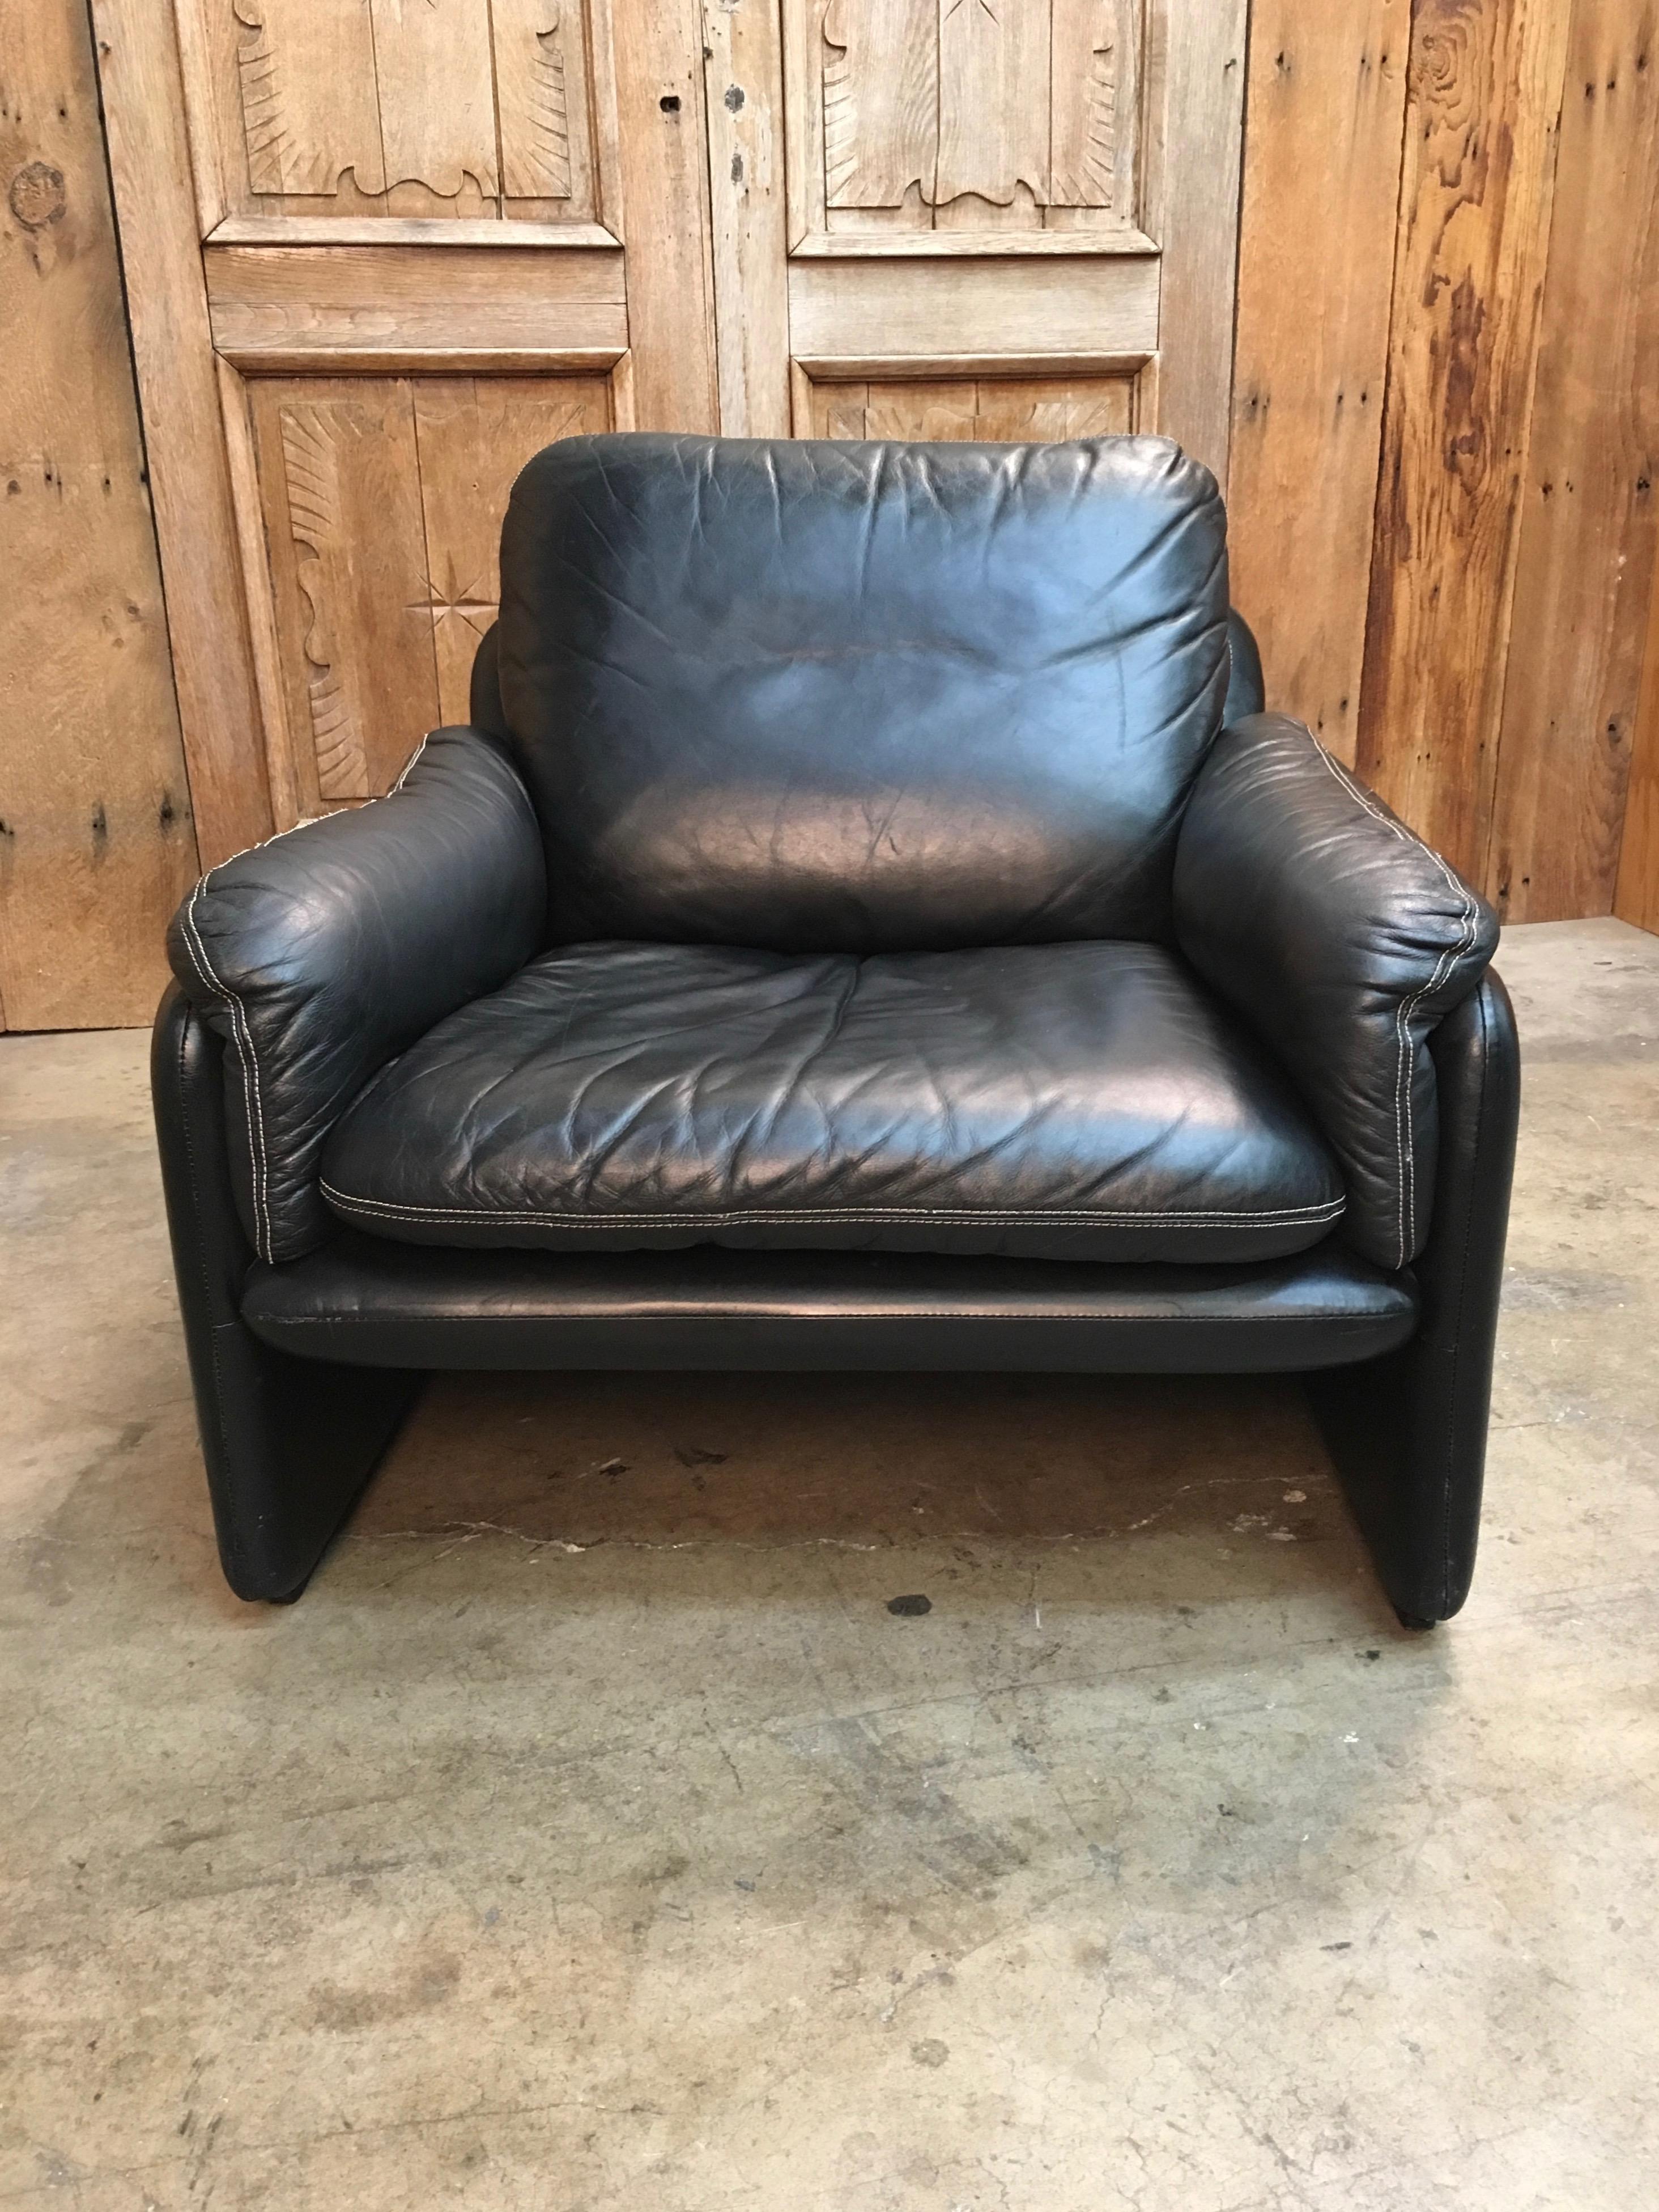 1980s sleek black leather lounge chair by De Sede still retains its original turner of New York label.